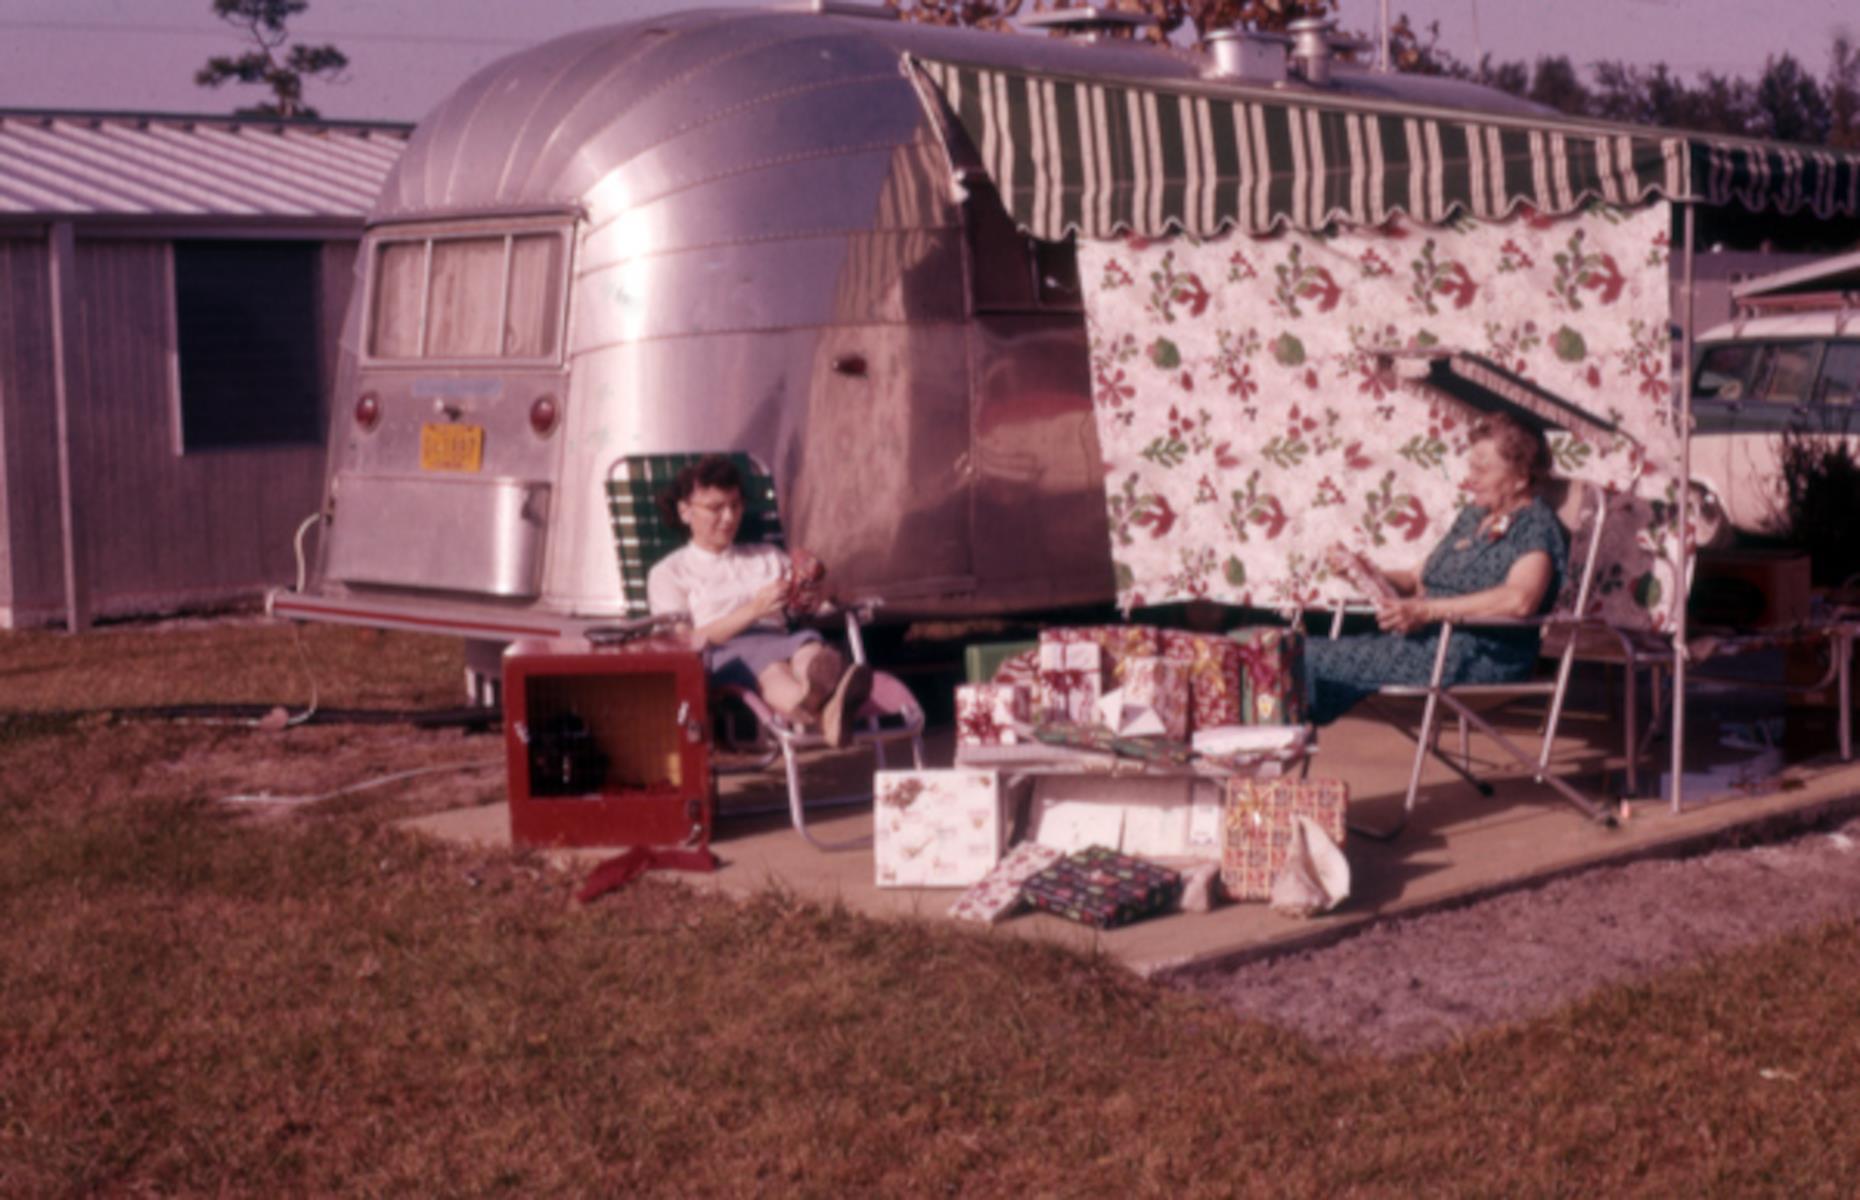 <p>Airstreams have been a favorite home-on-the-road for vacationers for almost a century. Back in 1929, Wally Byam built the first Airstream trailer<span>—</span>a teardrop-shaped canvas and Masonite shelter attached to a Ford Model T chassis<span>—</span>mainly for his wife Marion, who was fed up camping in draughty tents. A year later, Byam published a DIY guide to building a trailer, which was followed by floods of requests to <a href="https://www.loveproperty.com/gallerylist/96534/the-most-amazing-rvs-on-the-planet">construct RVs</a>. To cope with the demand, Byam rented a factory in Culver City, California, officially founding his trailer manufacturing company in 1931.</p>